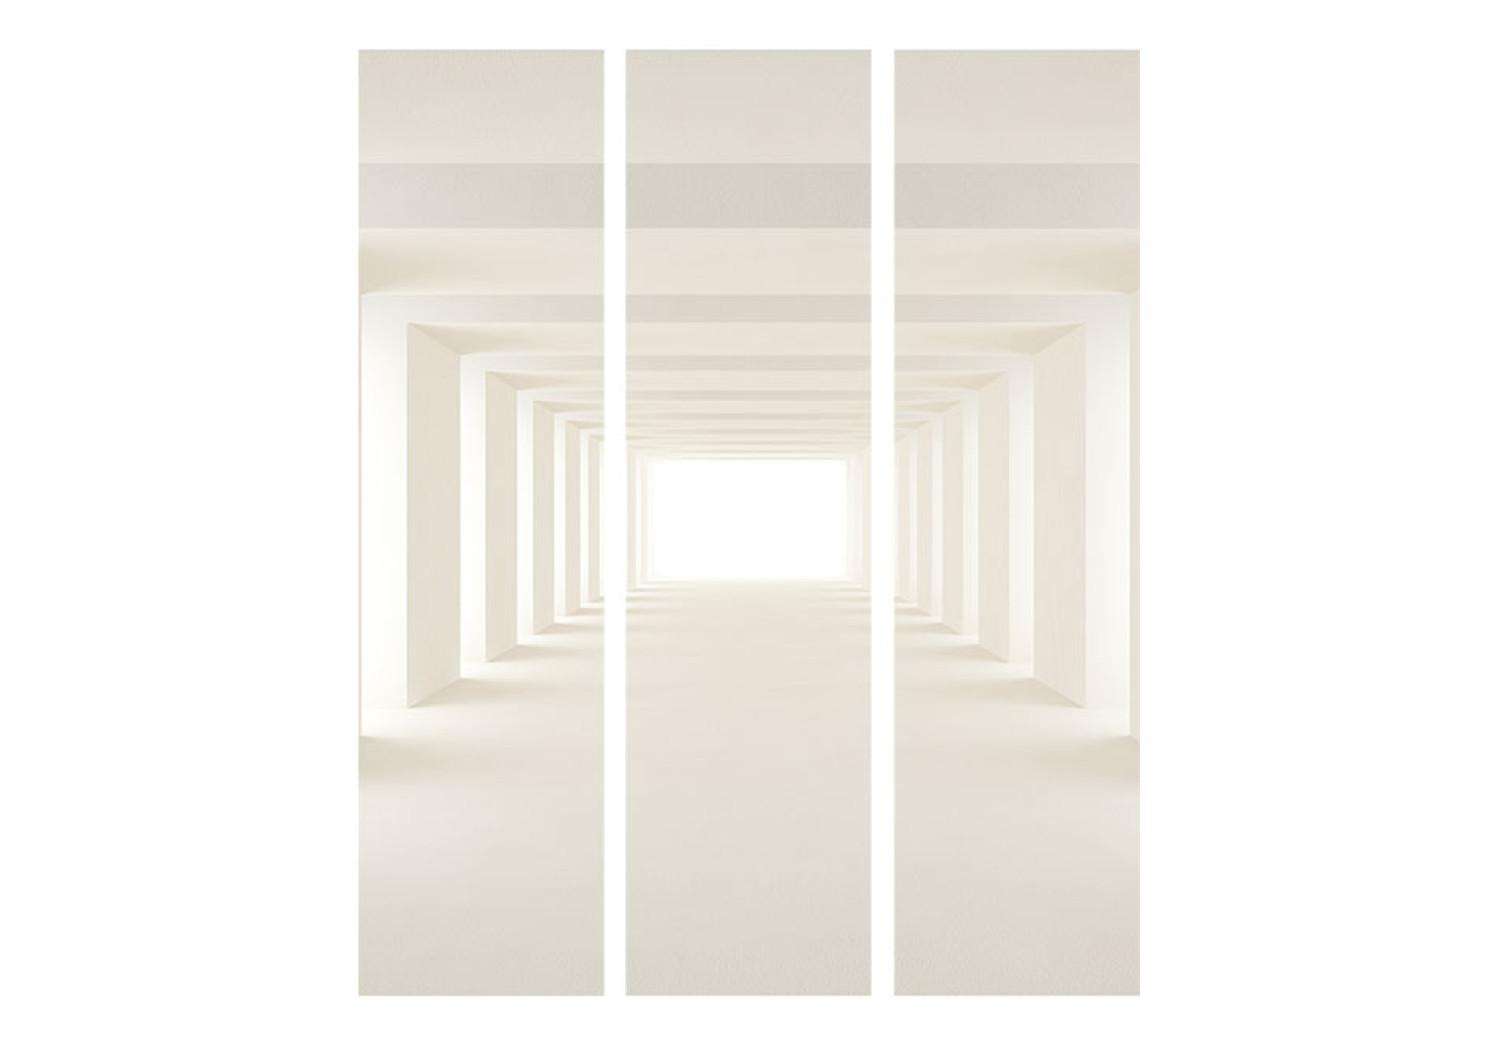 Room Divider Towards the Light - abstract bright corridor with a 3D illusion motif